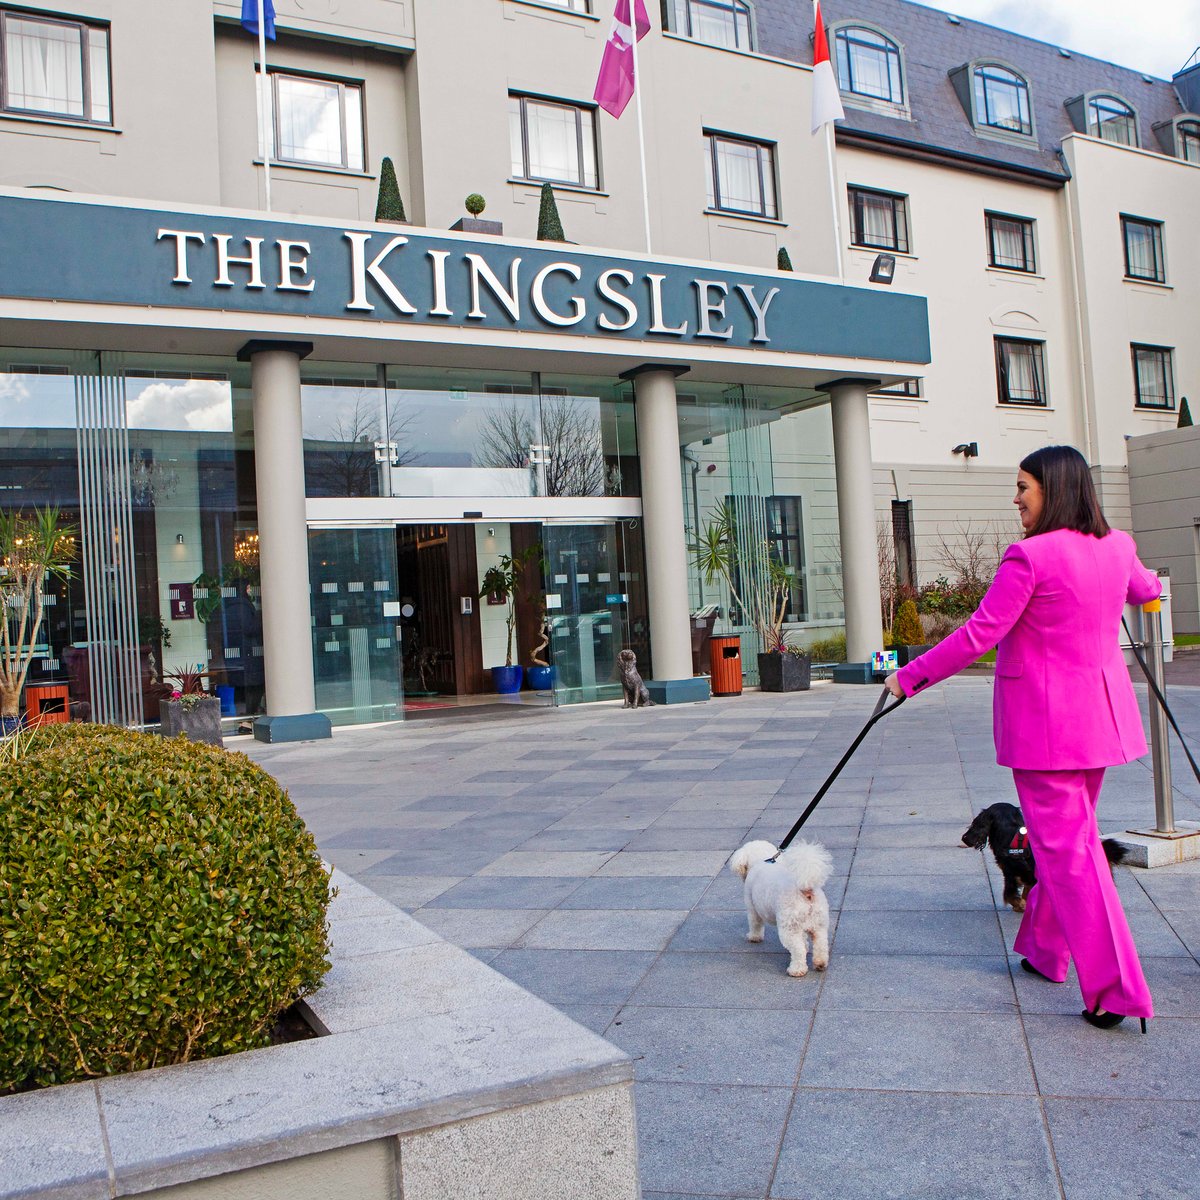 🐶 Dog Friendly Hotel 🐶 What better way to spend a Sunday than down by the river! We cater for your furry best friend and even offer overnight canine packages catered to spoil your dog! For more bit.ly/3wyx1cm #thekingsley #urbanretreat #dogfriendlyhotel